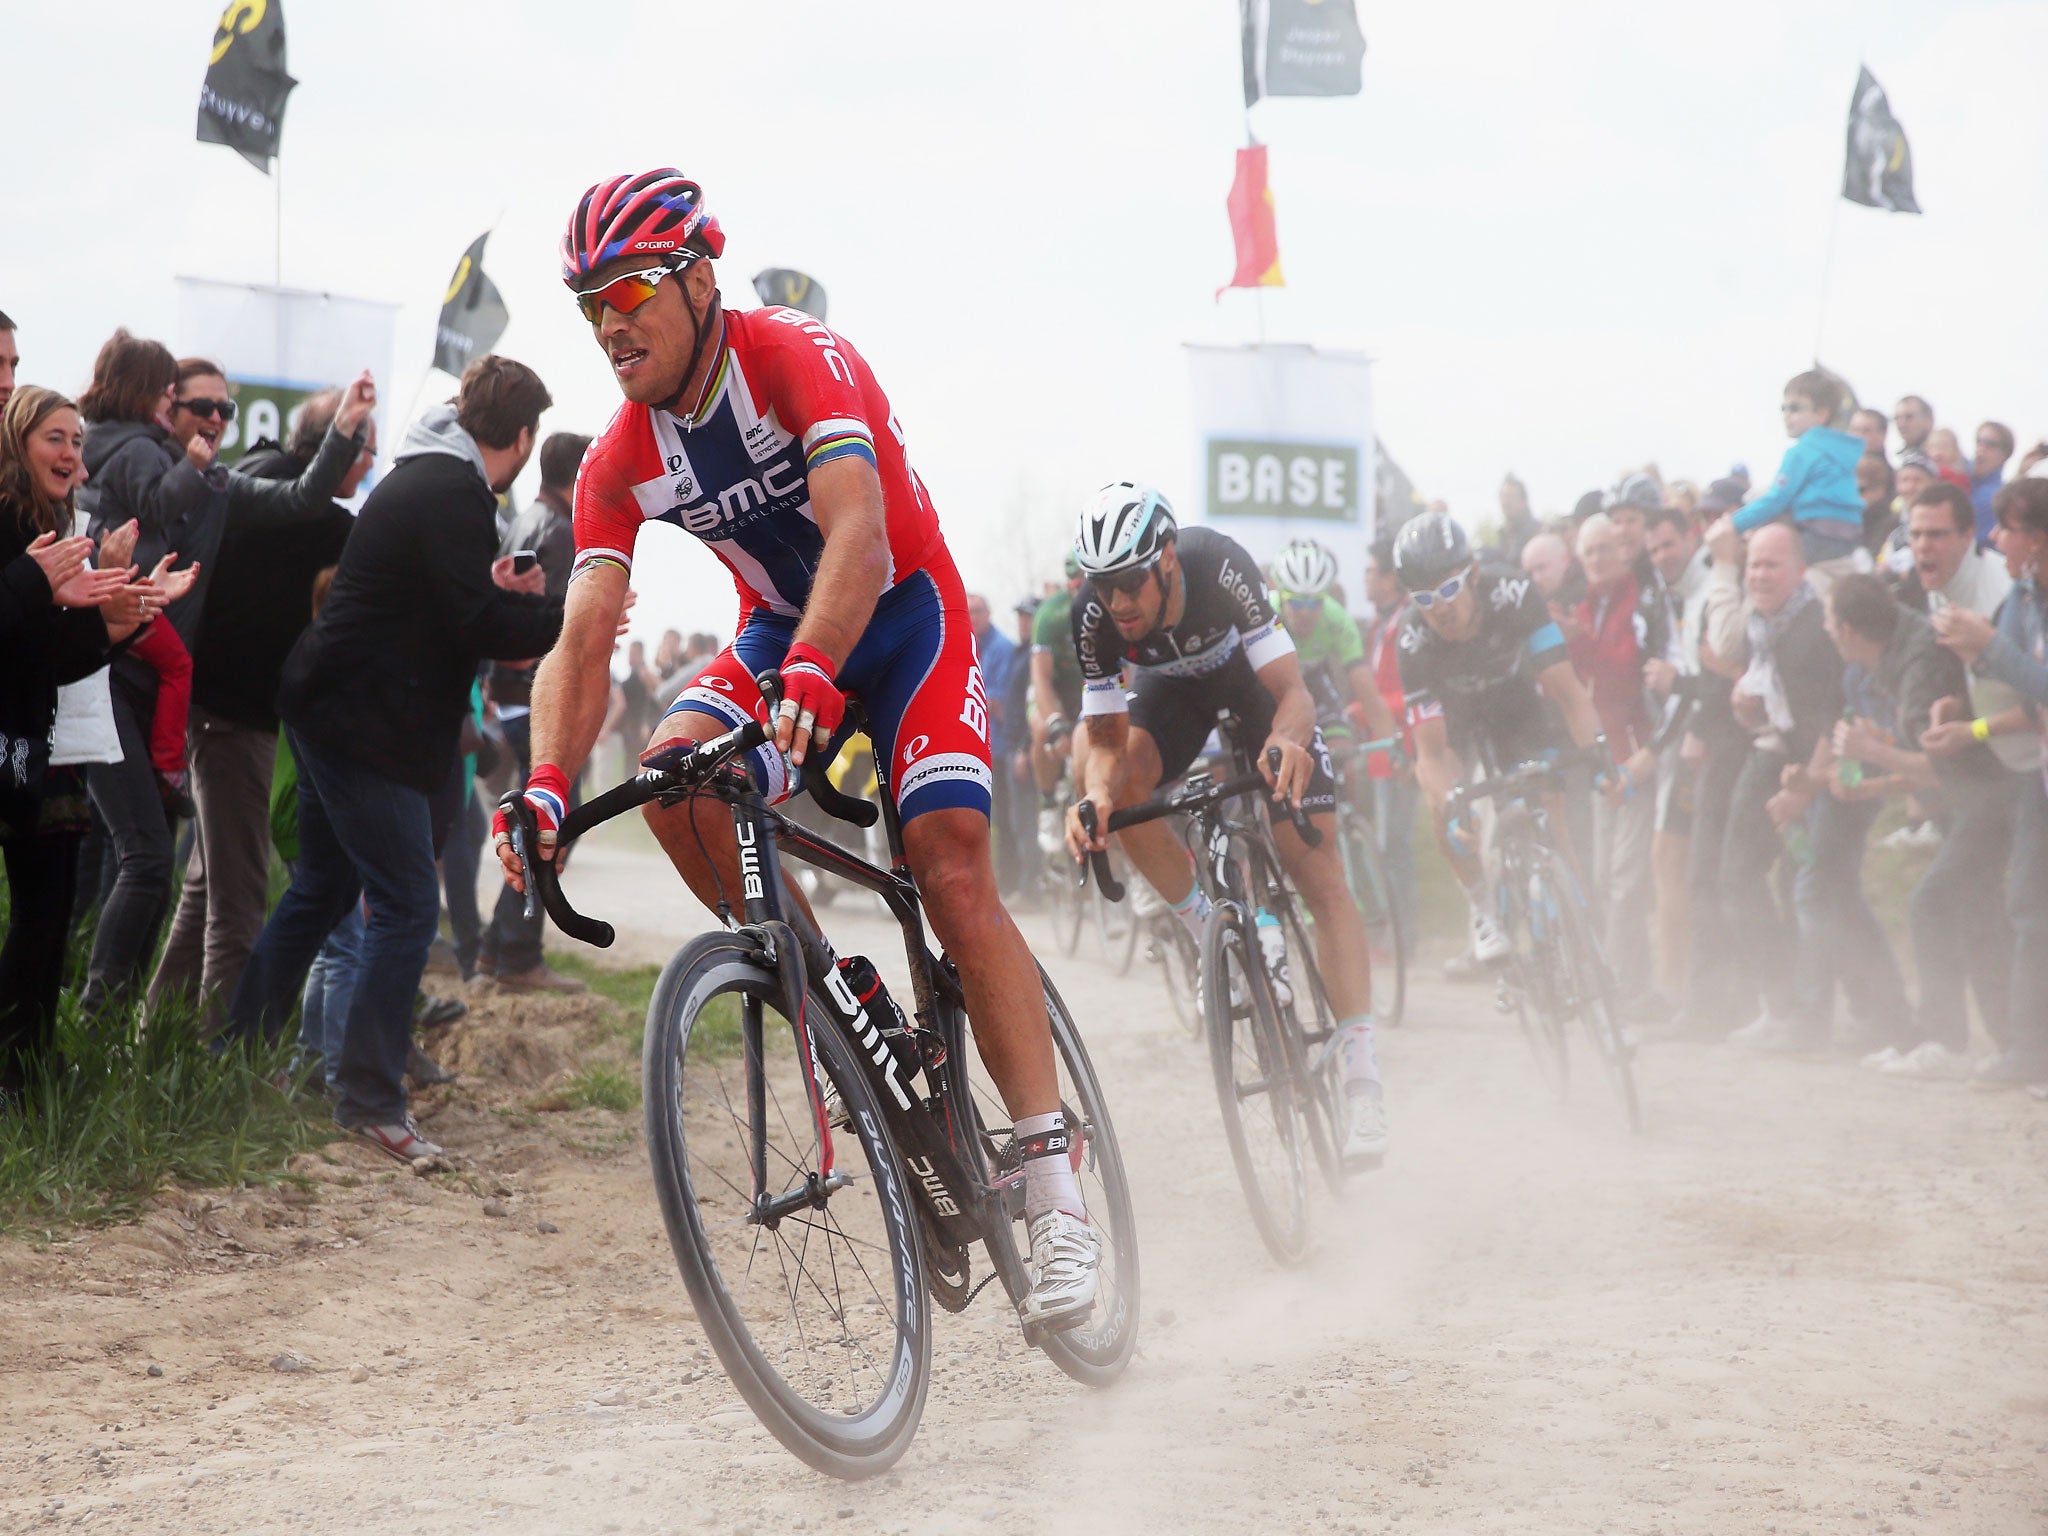 The cobbles of northern France will present a severe test on Stage 5